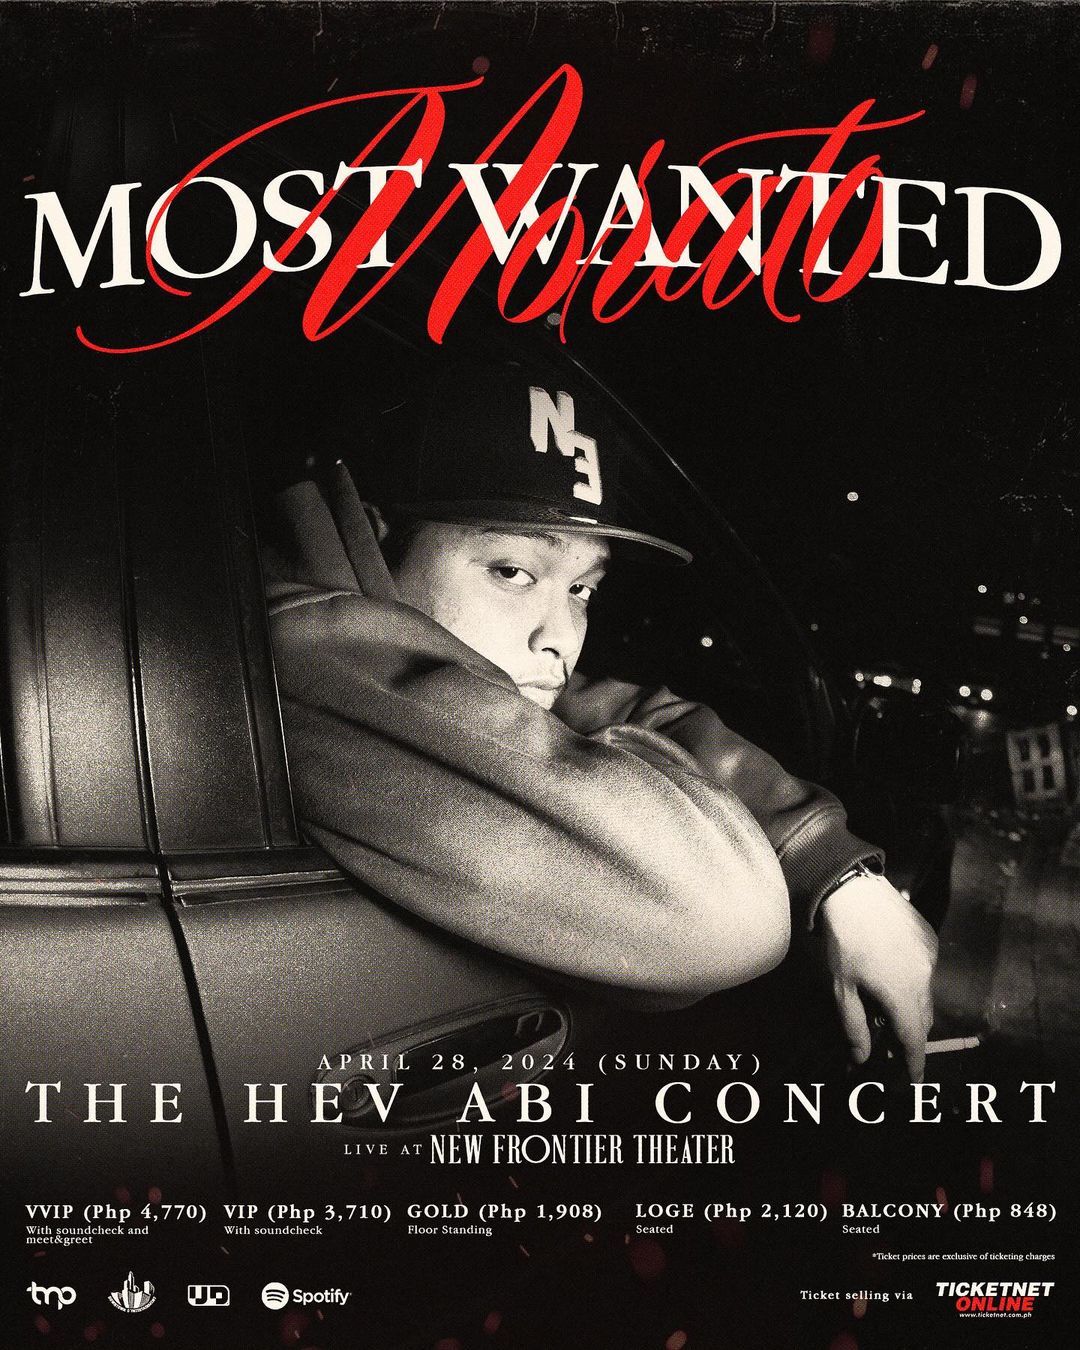 HEV ABI MORATO MOST WANTED